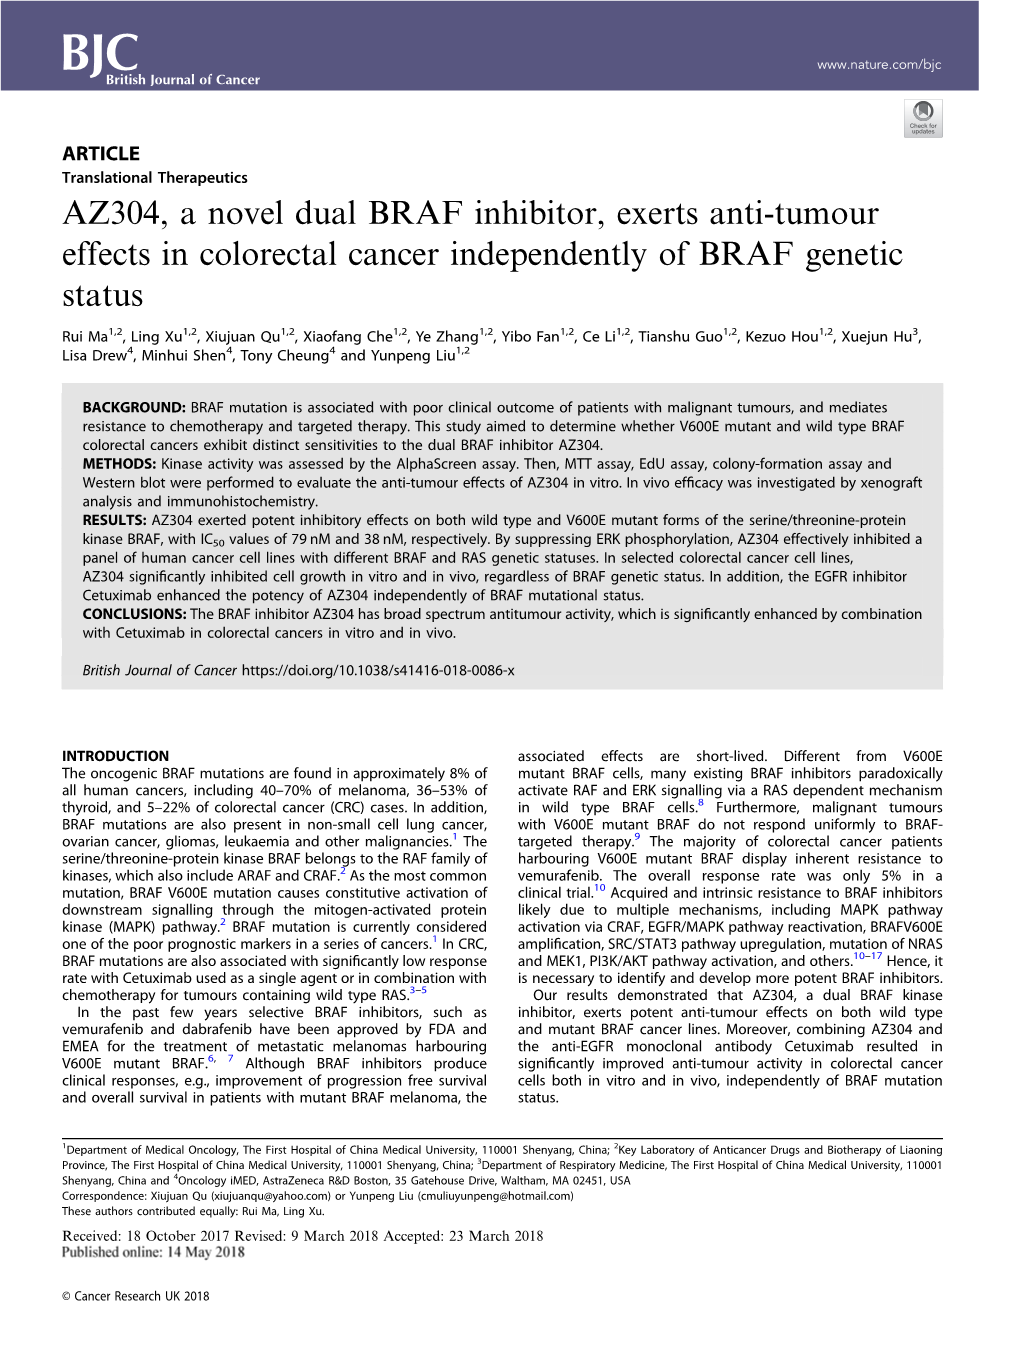 AZ304, a Novel Dual BRAF Inhibitor, Exerts Anti-Tumour Effects in Colorectal Cancer Independently of BRAF Genetic Status